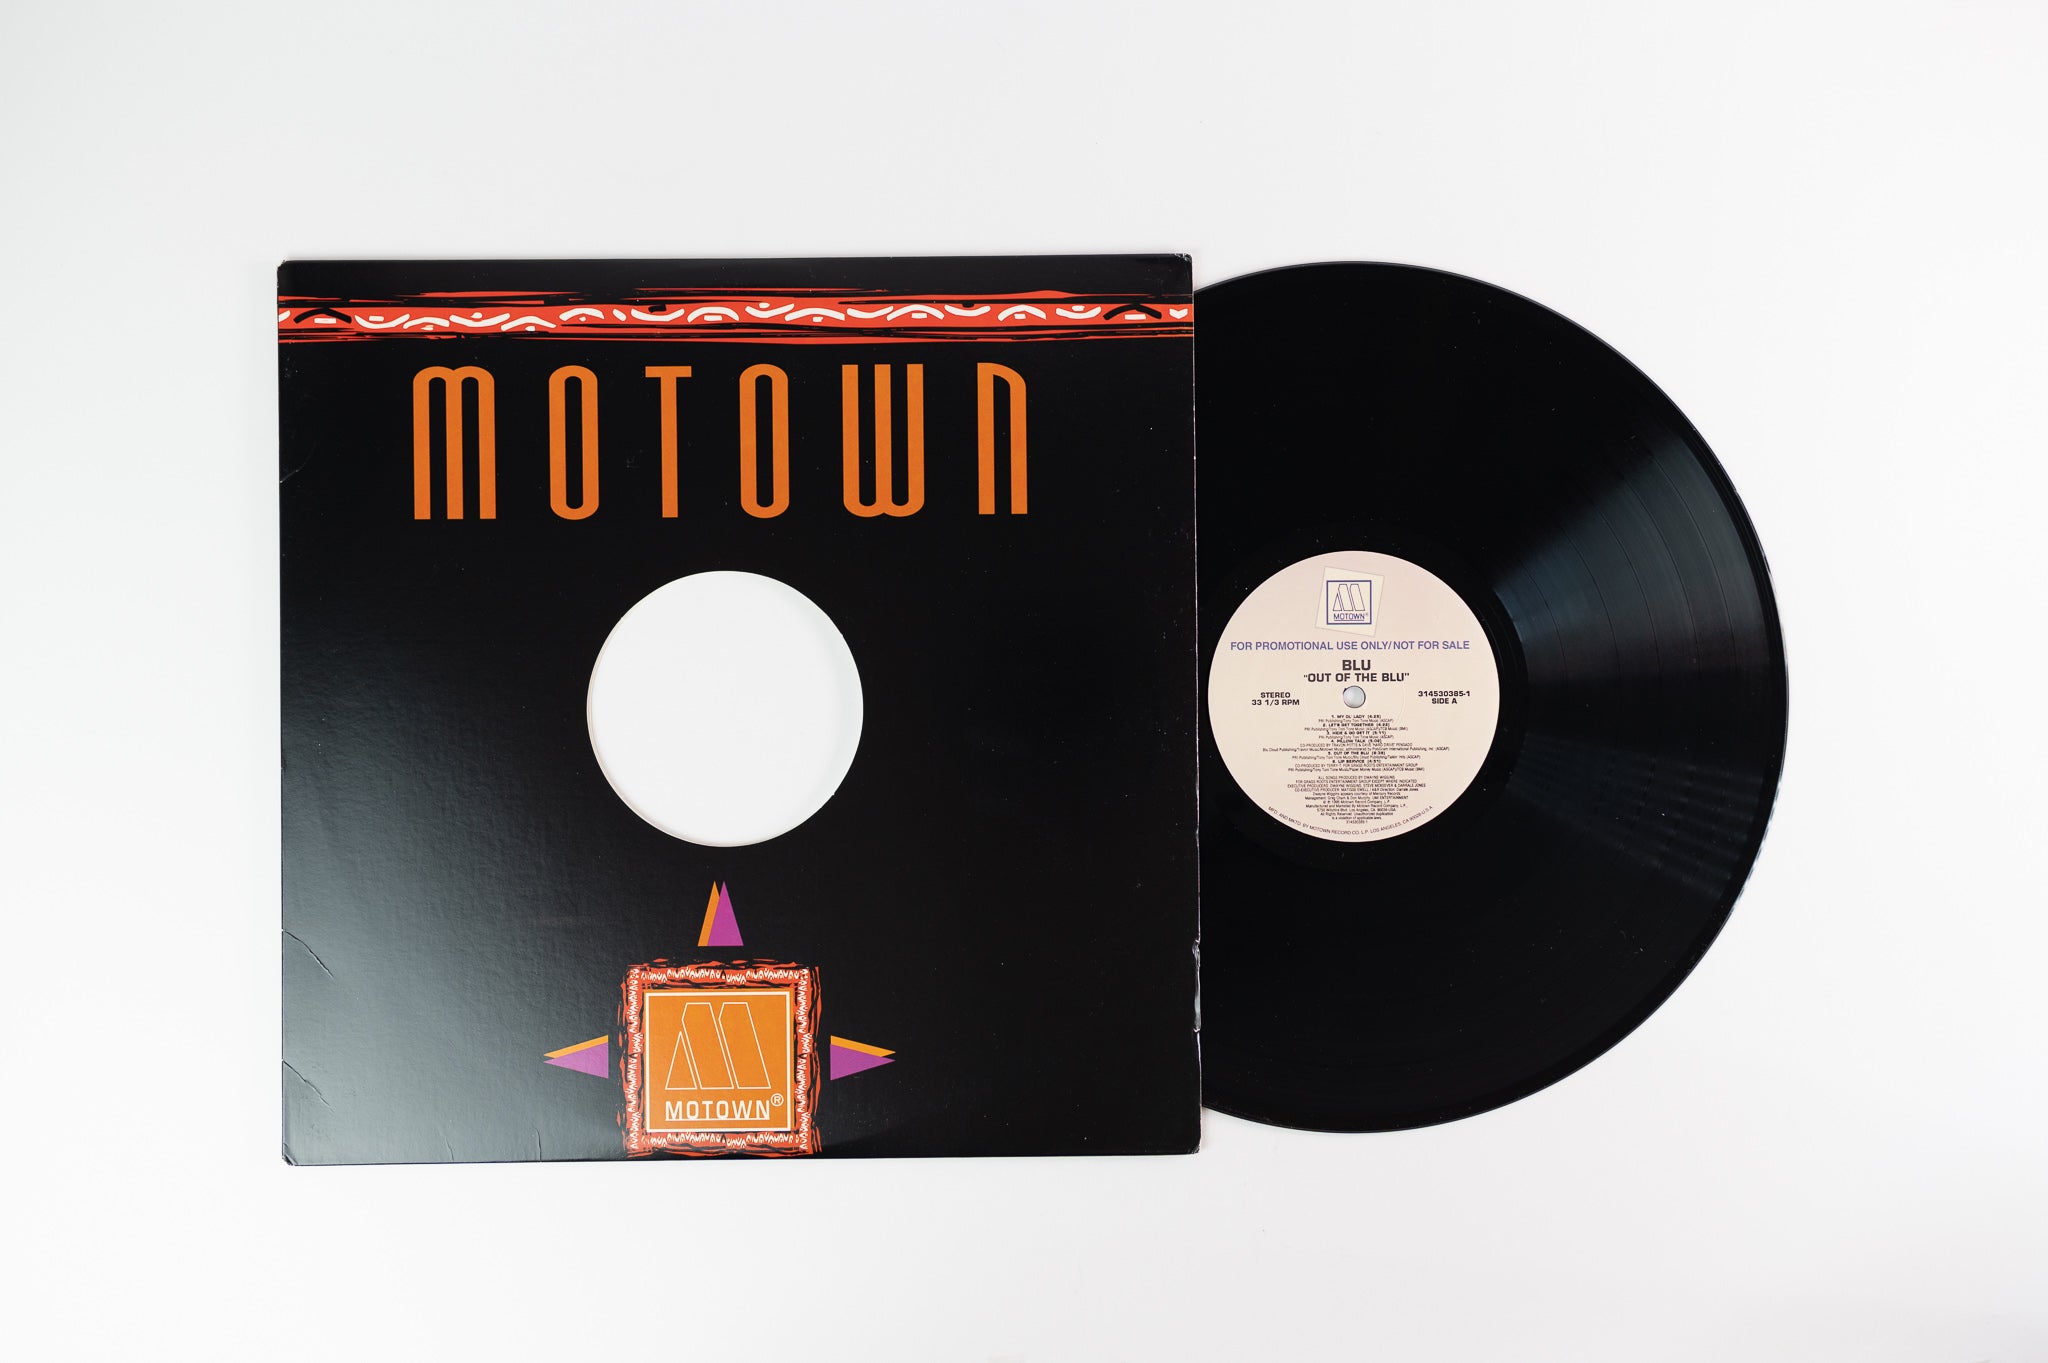 Blu - Out Of The Blu on Motown Promo